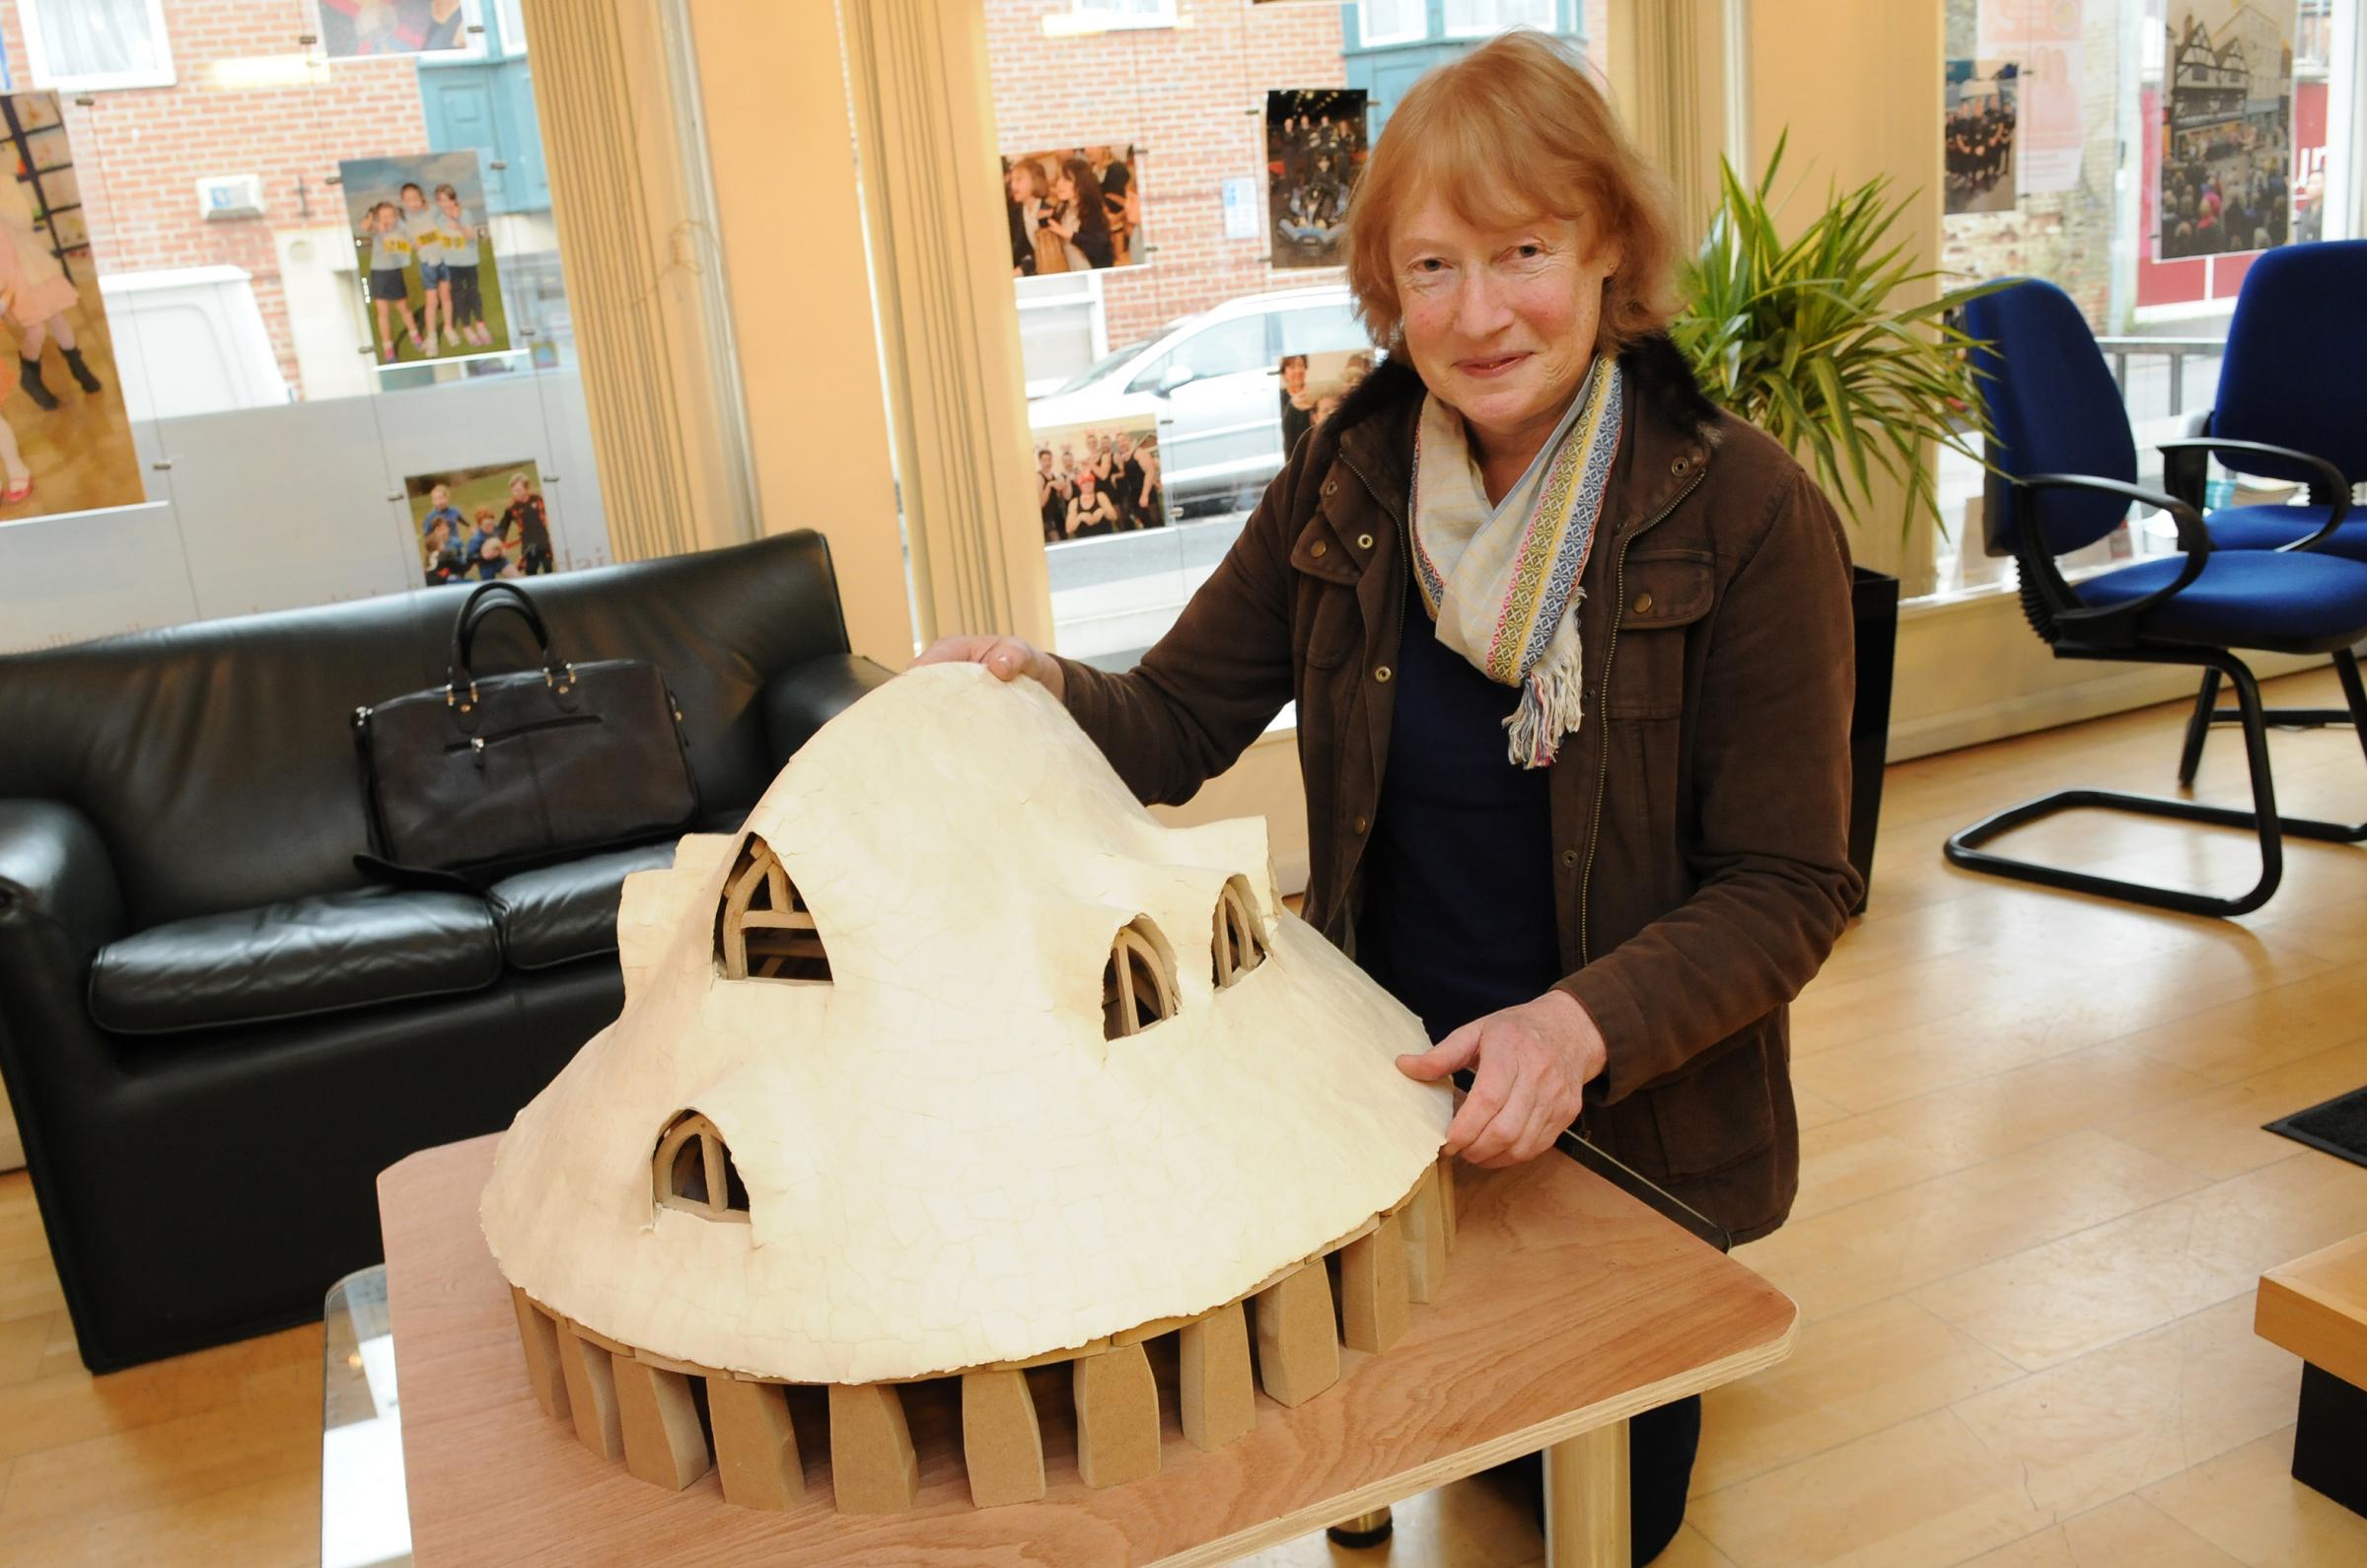    Sarah Ewbank believes the ancient structure was a two-storey “majestic roundhouse” and has used her 30 years of experience in desi